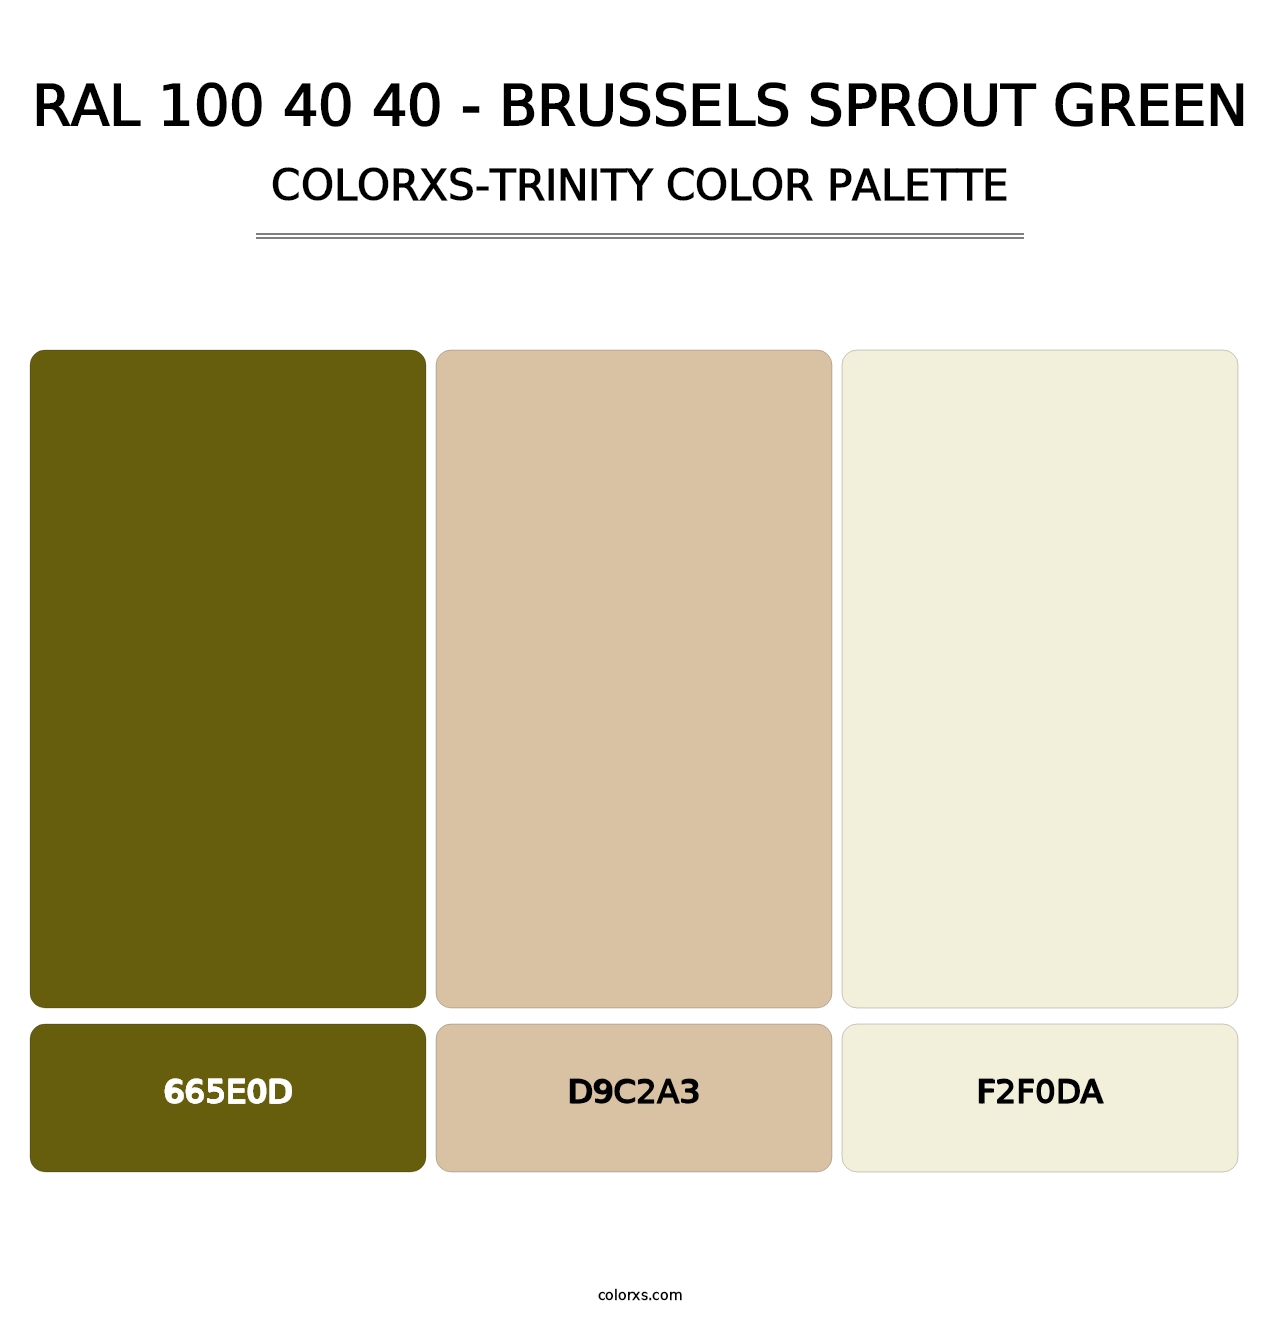 RAL 100 40 40 - Brussels Sprout Green - Colorxs Trinity Palette